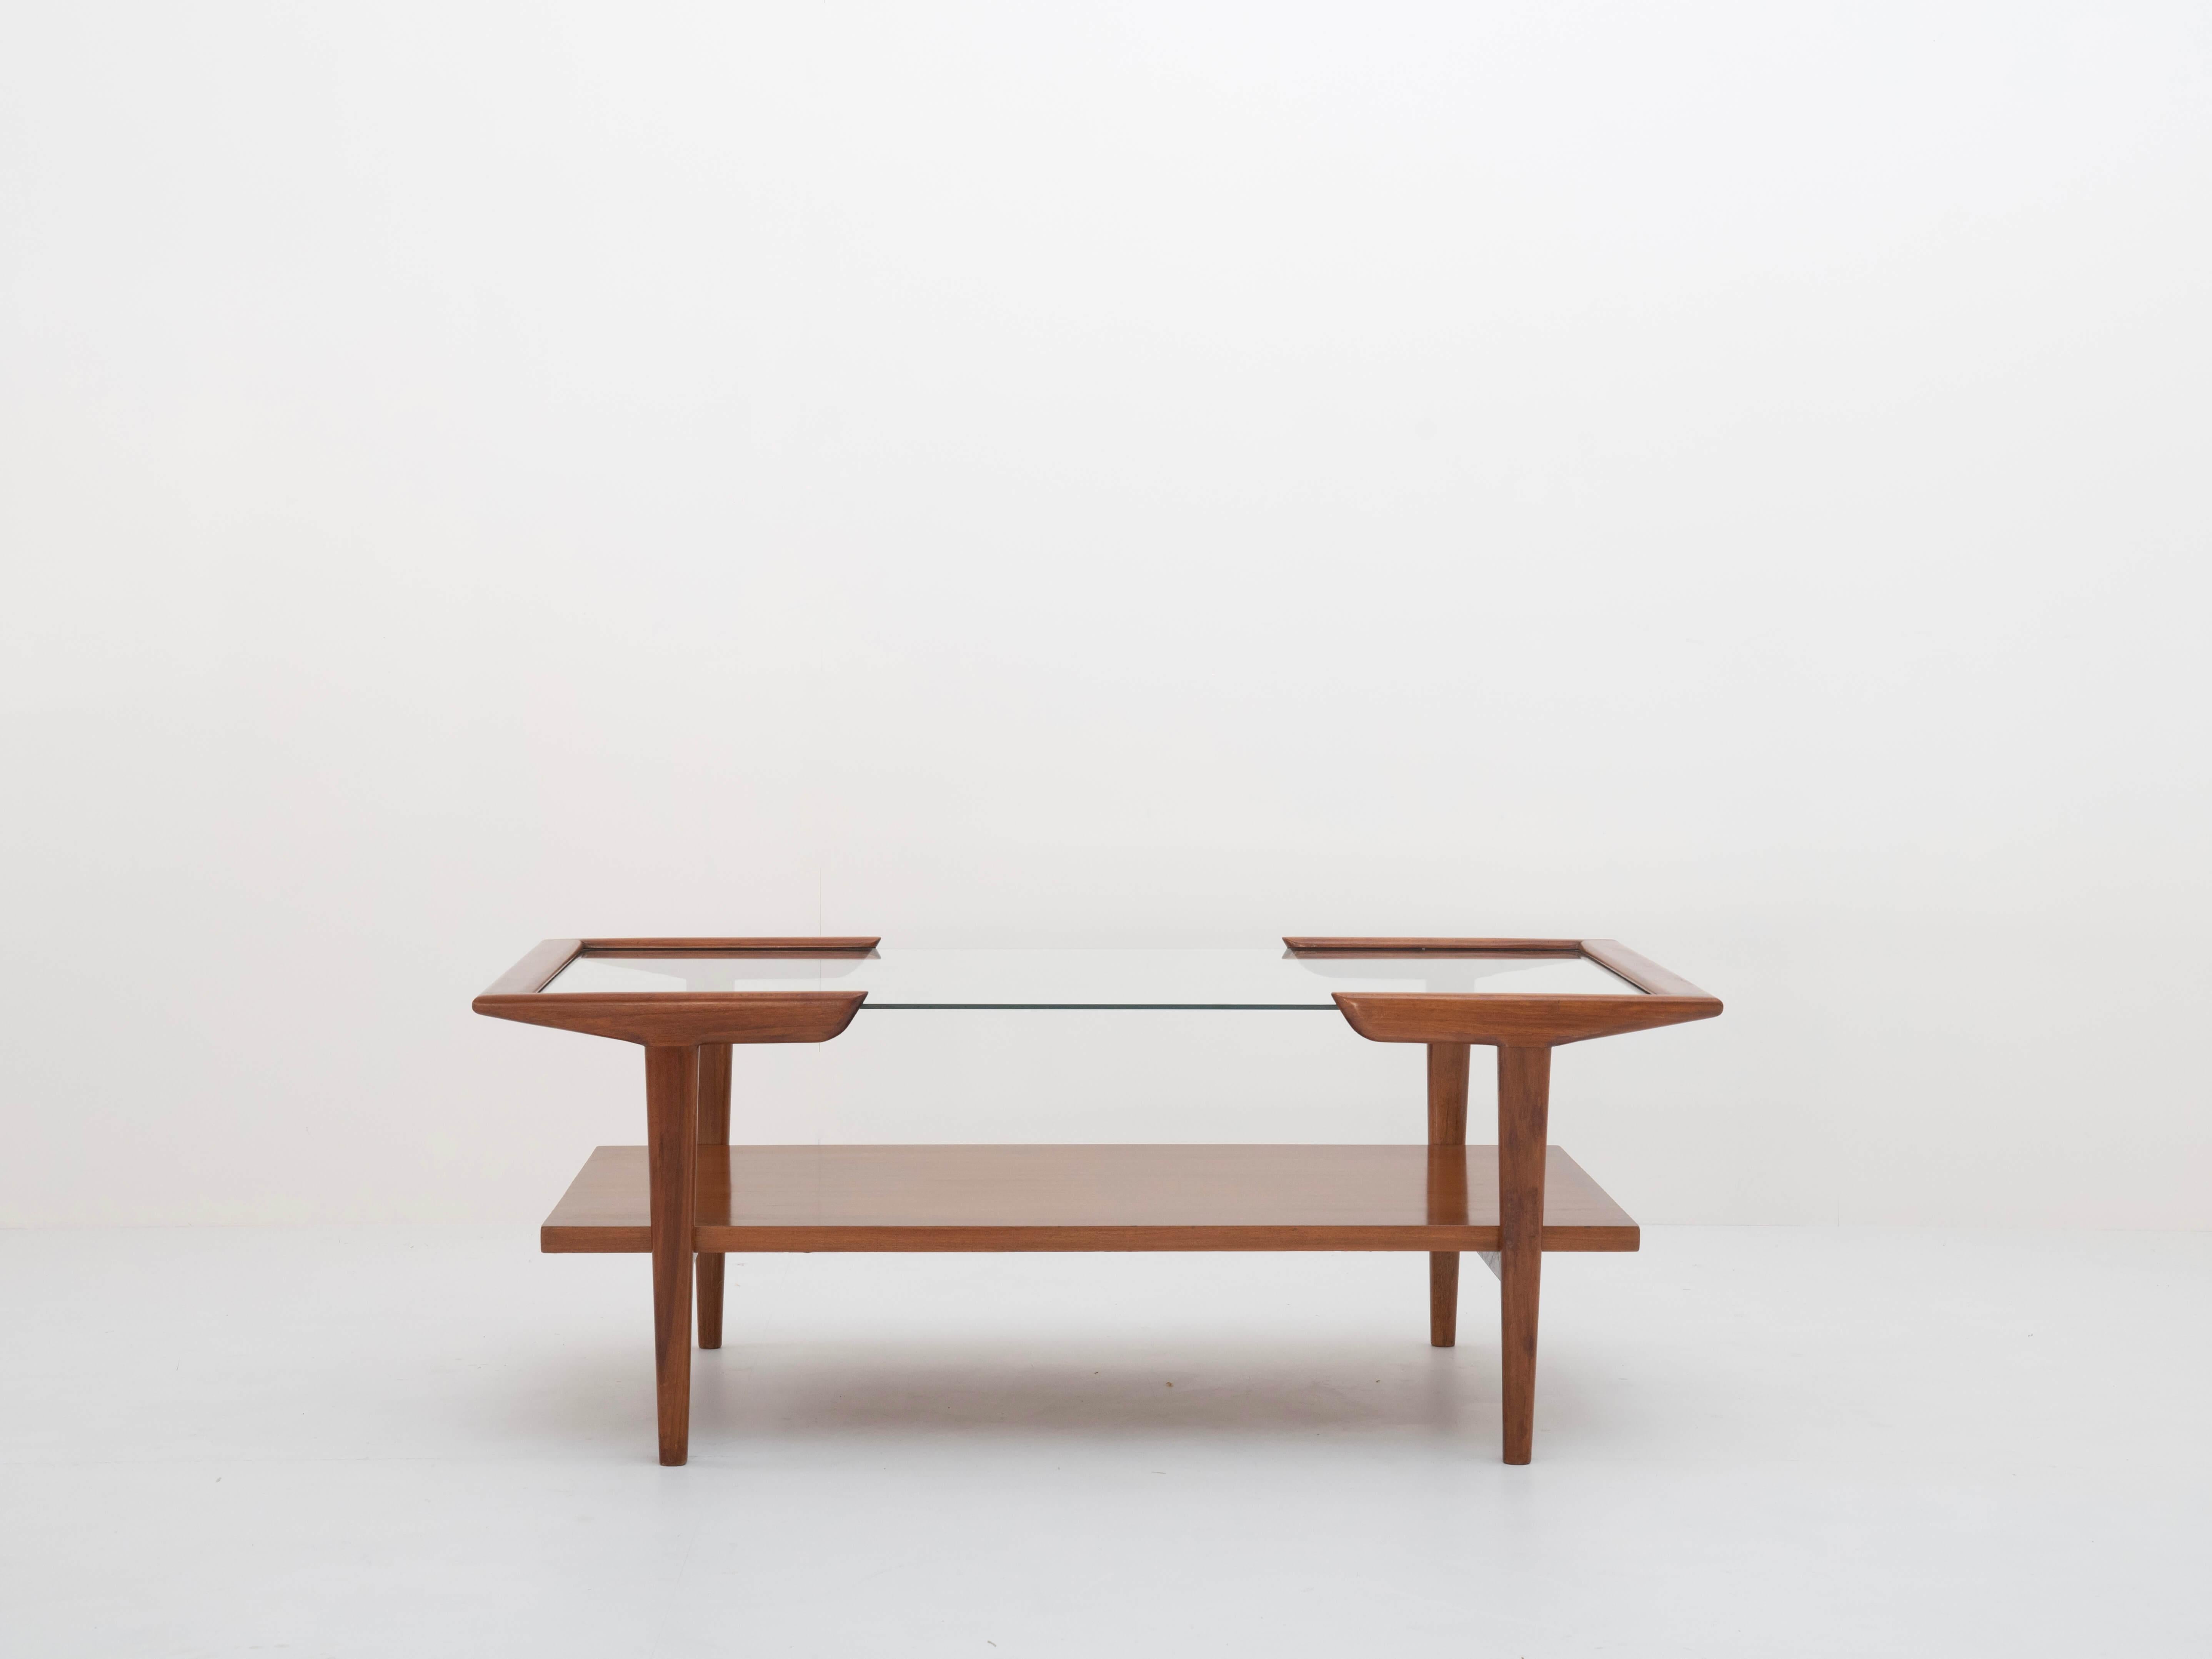 Coffee Table in wood and glass attributed to Martin Eisler, Brazil 1950s. This beautiful table is made of walnut wood and has a glass top. It has a rack under the glass top for magazines. This stylish table is clearly a statement of the mid-century